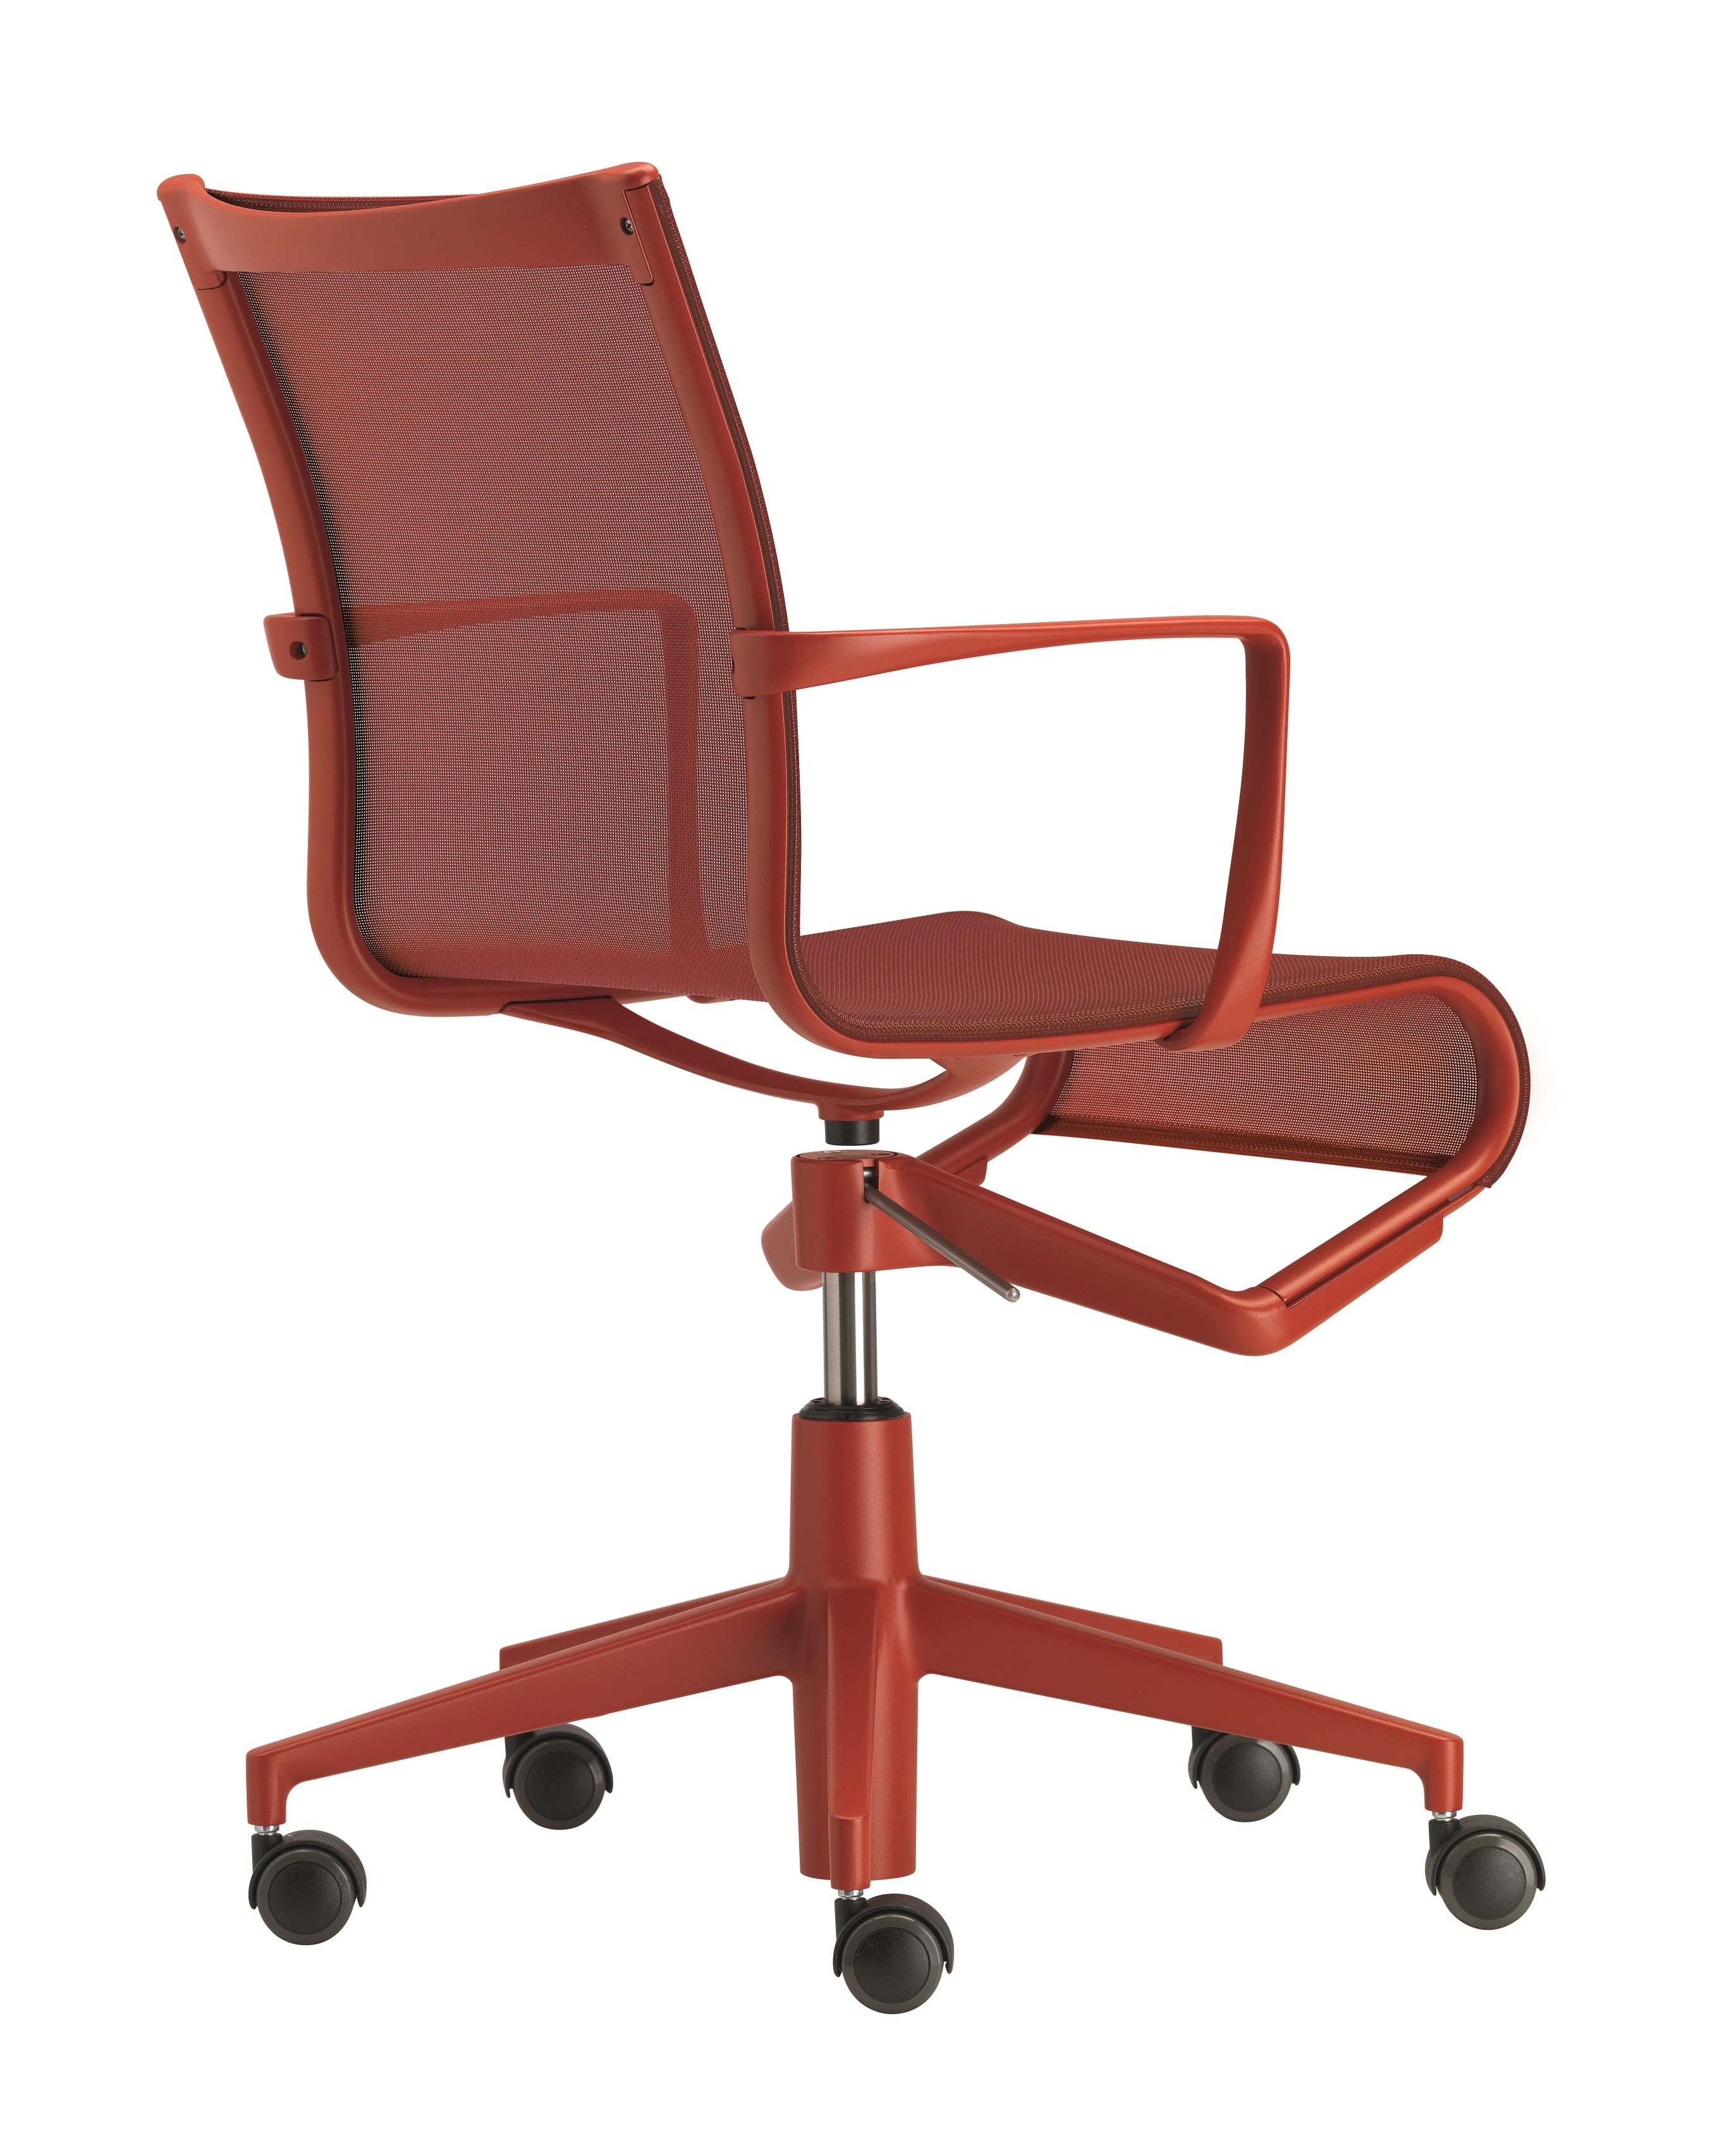 Contemporary Alias 434 Rollingframe 44 Chair in Coral Red Mesh & Red Lacquered Aluminum Frame For Sale